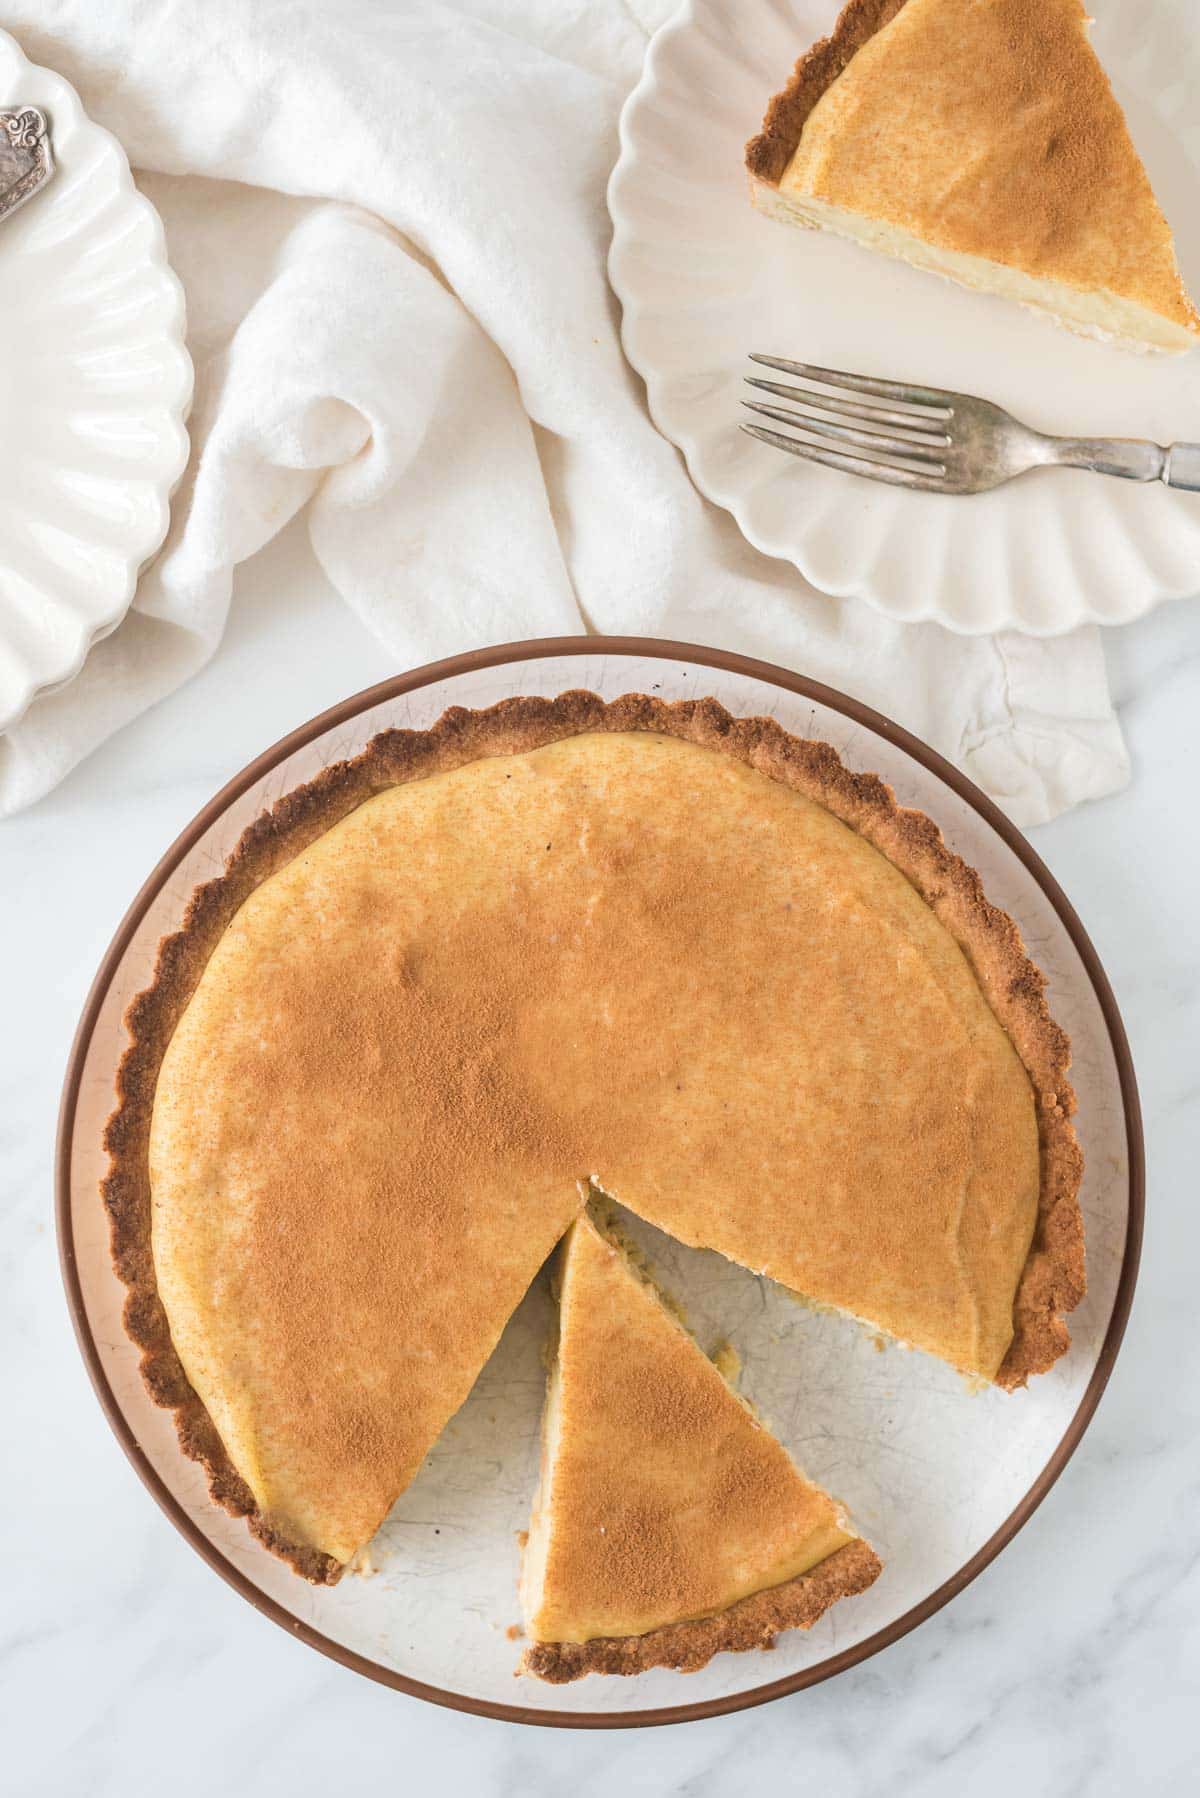 Milk tart on serving platter with cut piece at an angle and two plates with other slices in background